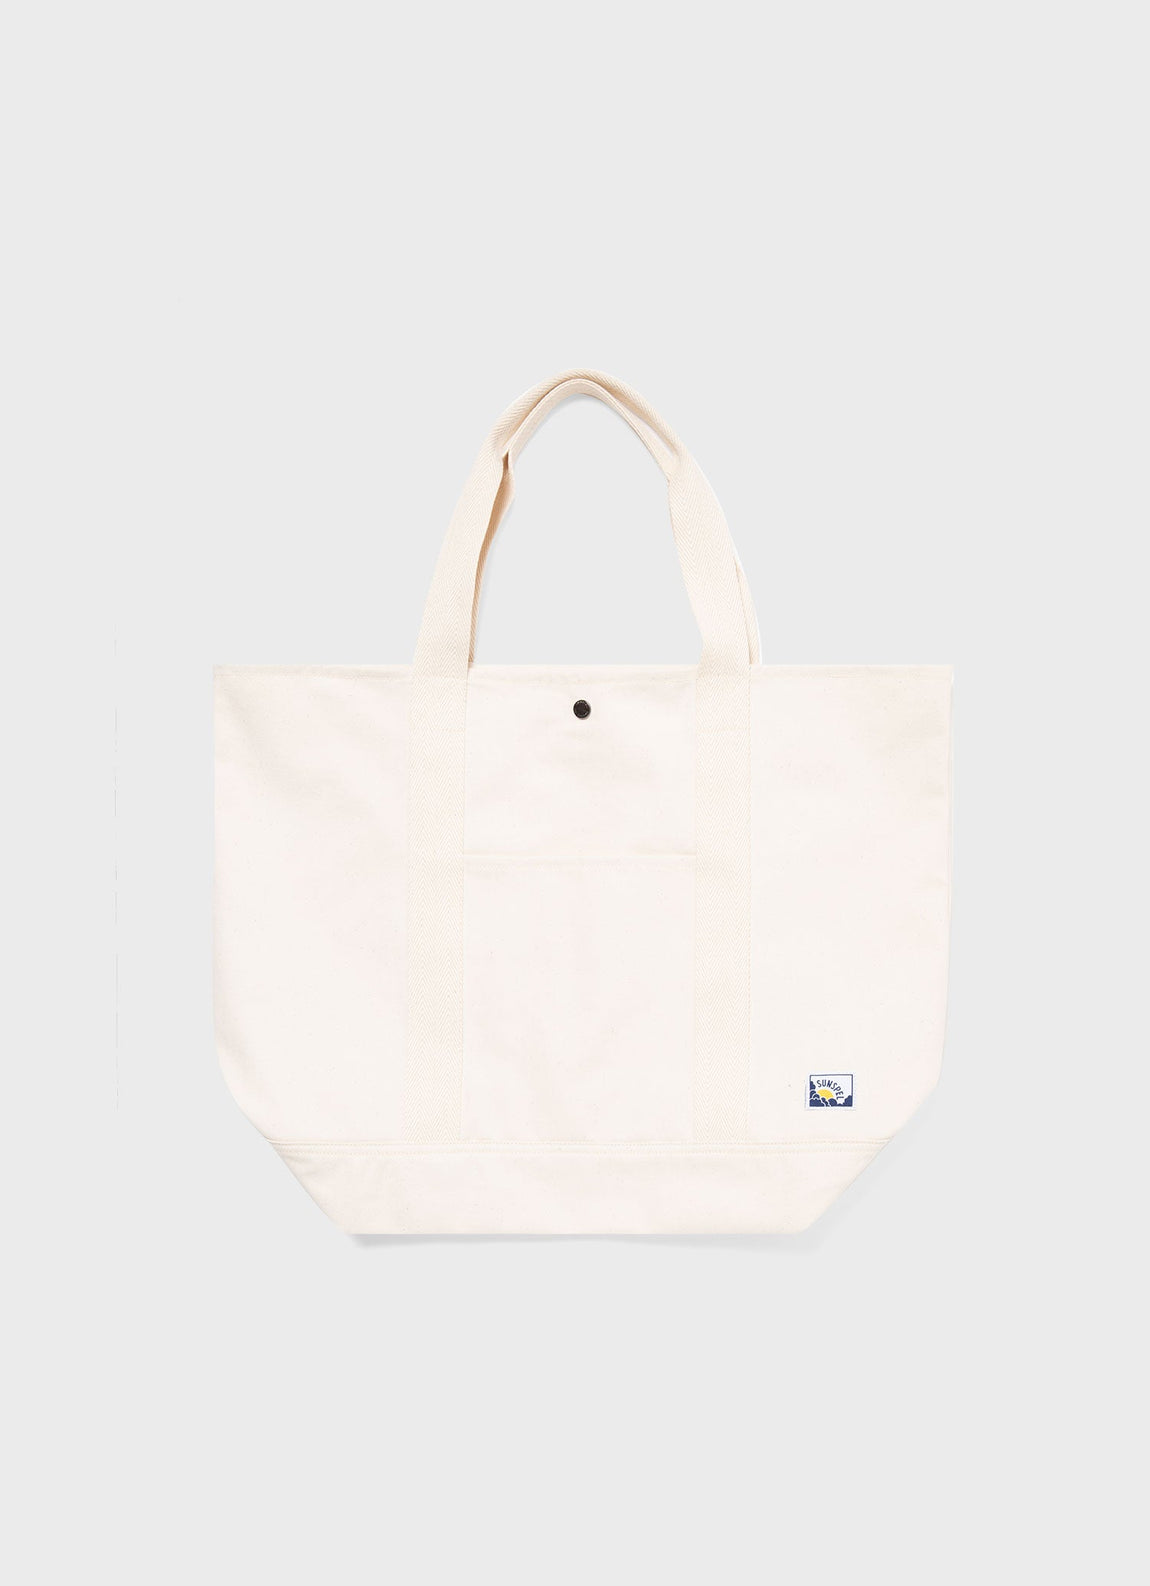 Large Tote in Off White